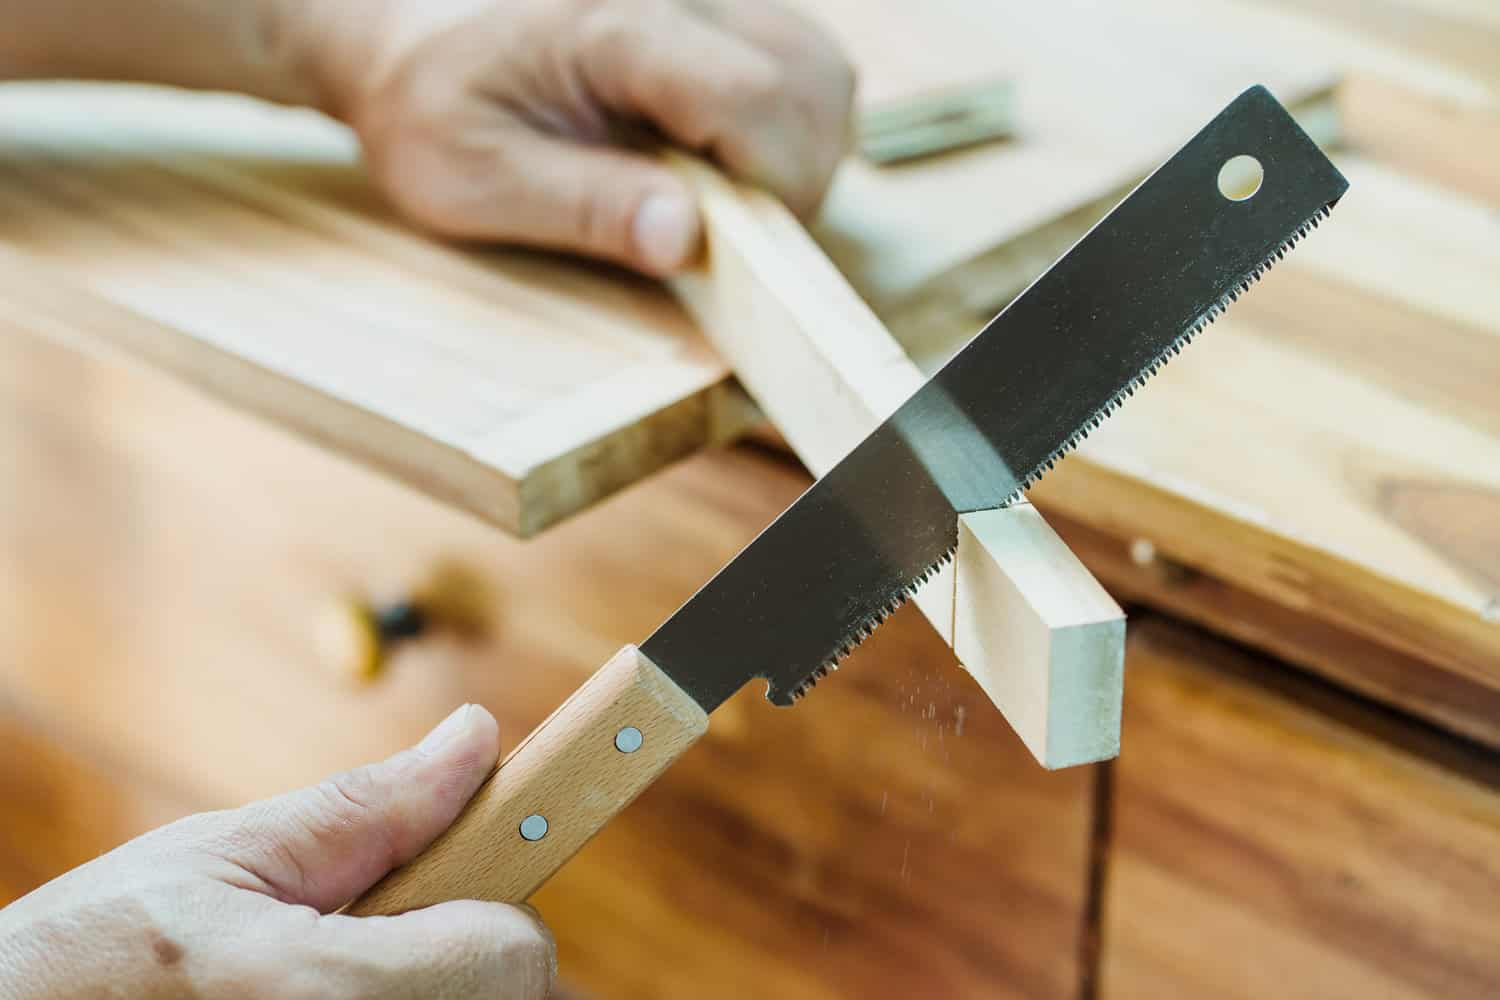 carpenter using Japanese saw or pull saw ,Crosscutting on wood on table, DIY maker and woodworking concept. selective focus